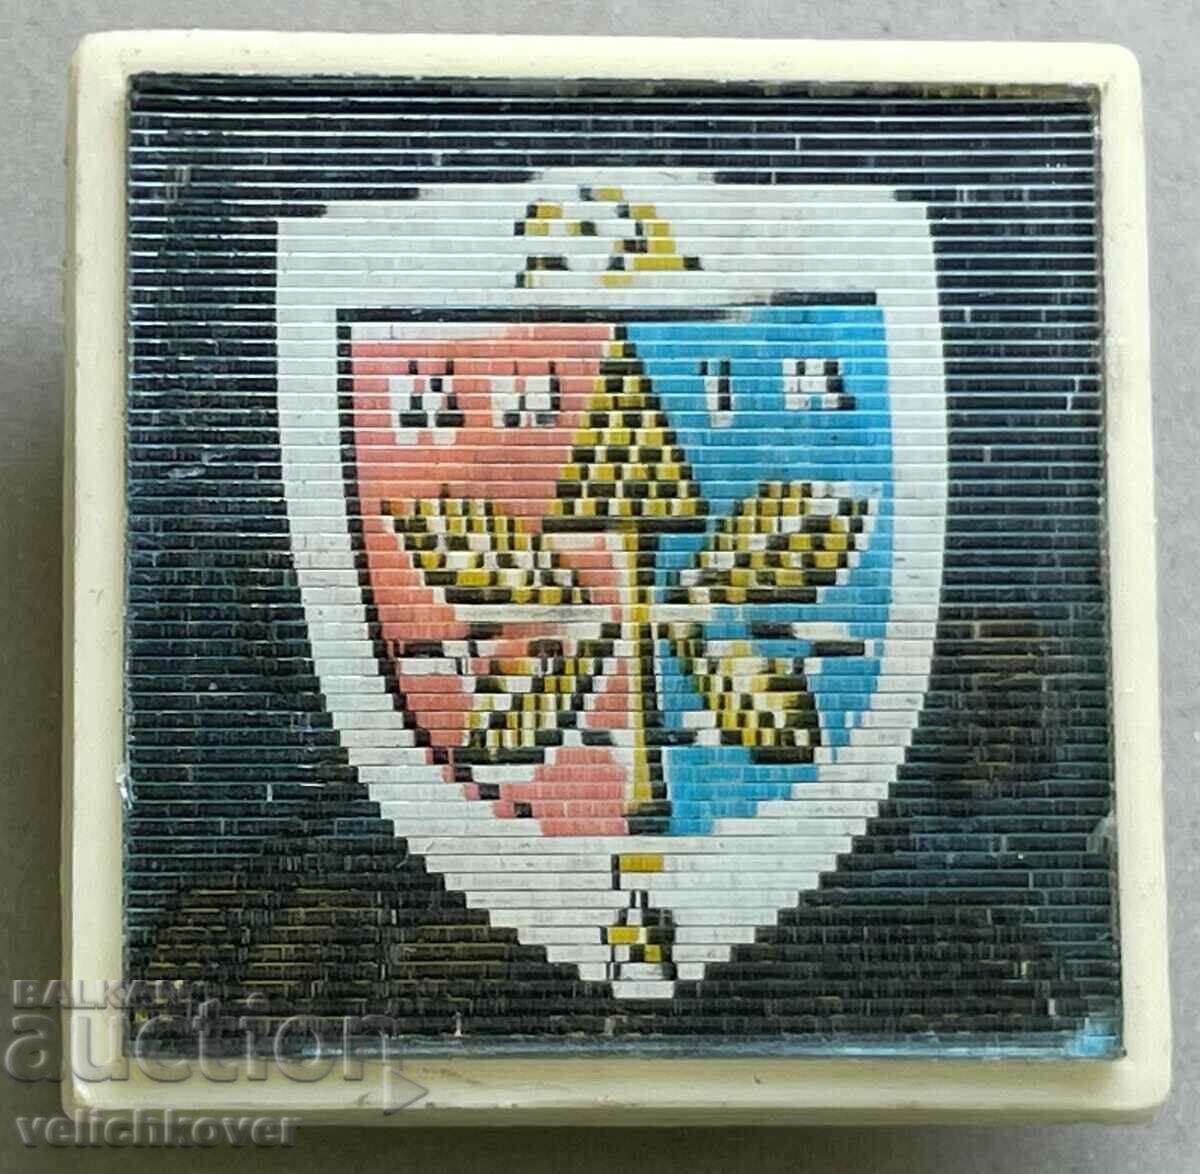 32640 USSR sign coat of arms city of Kyiv Ukraine 3D